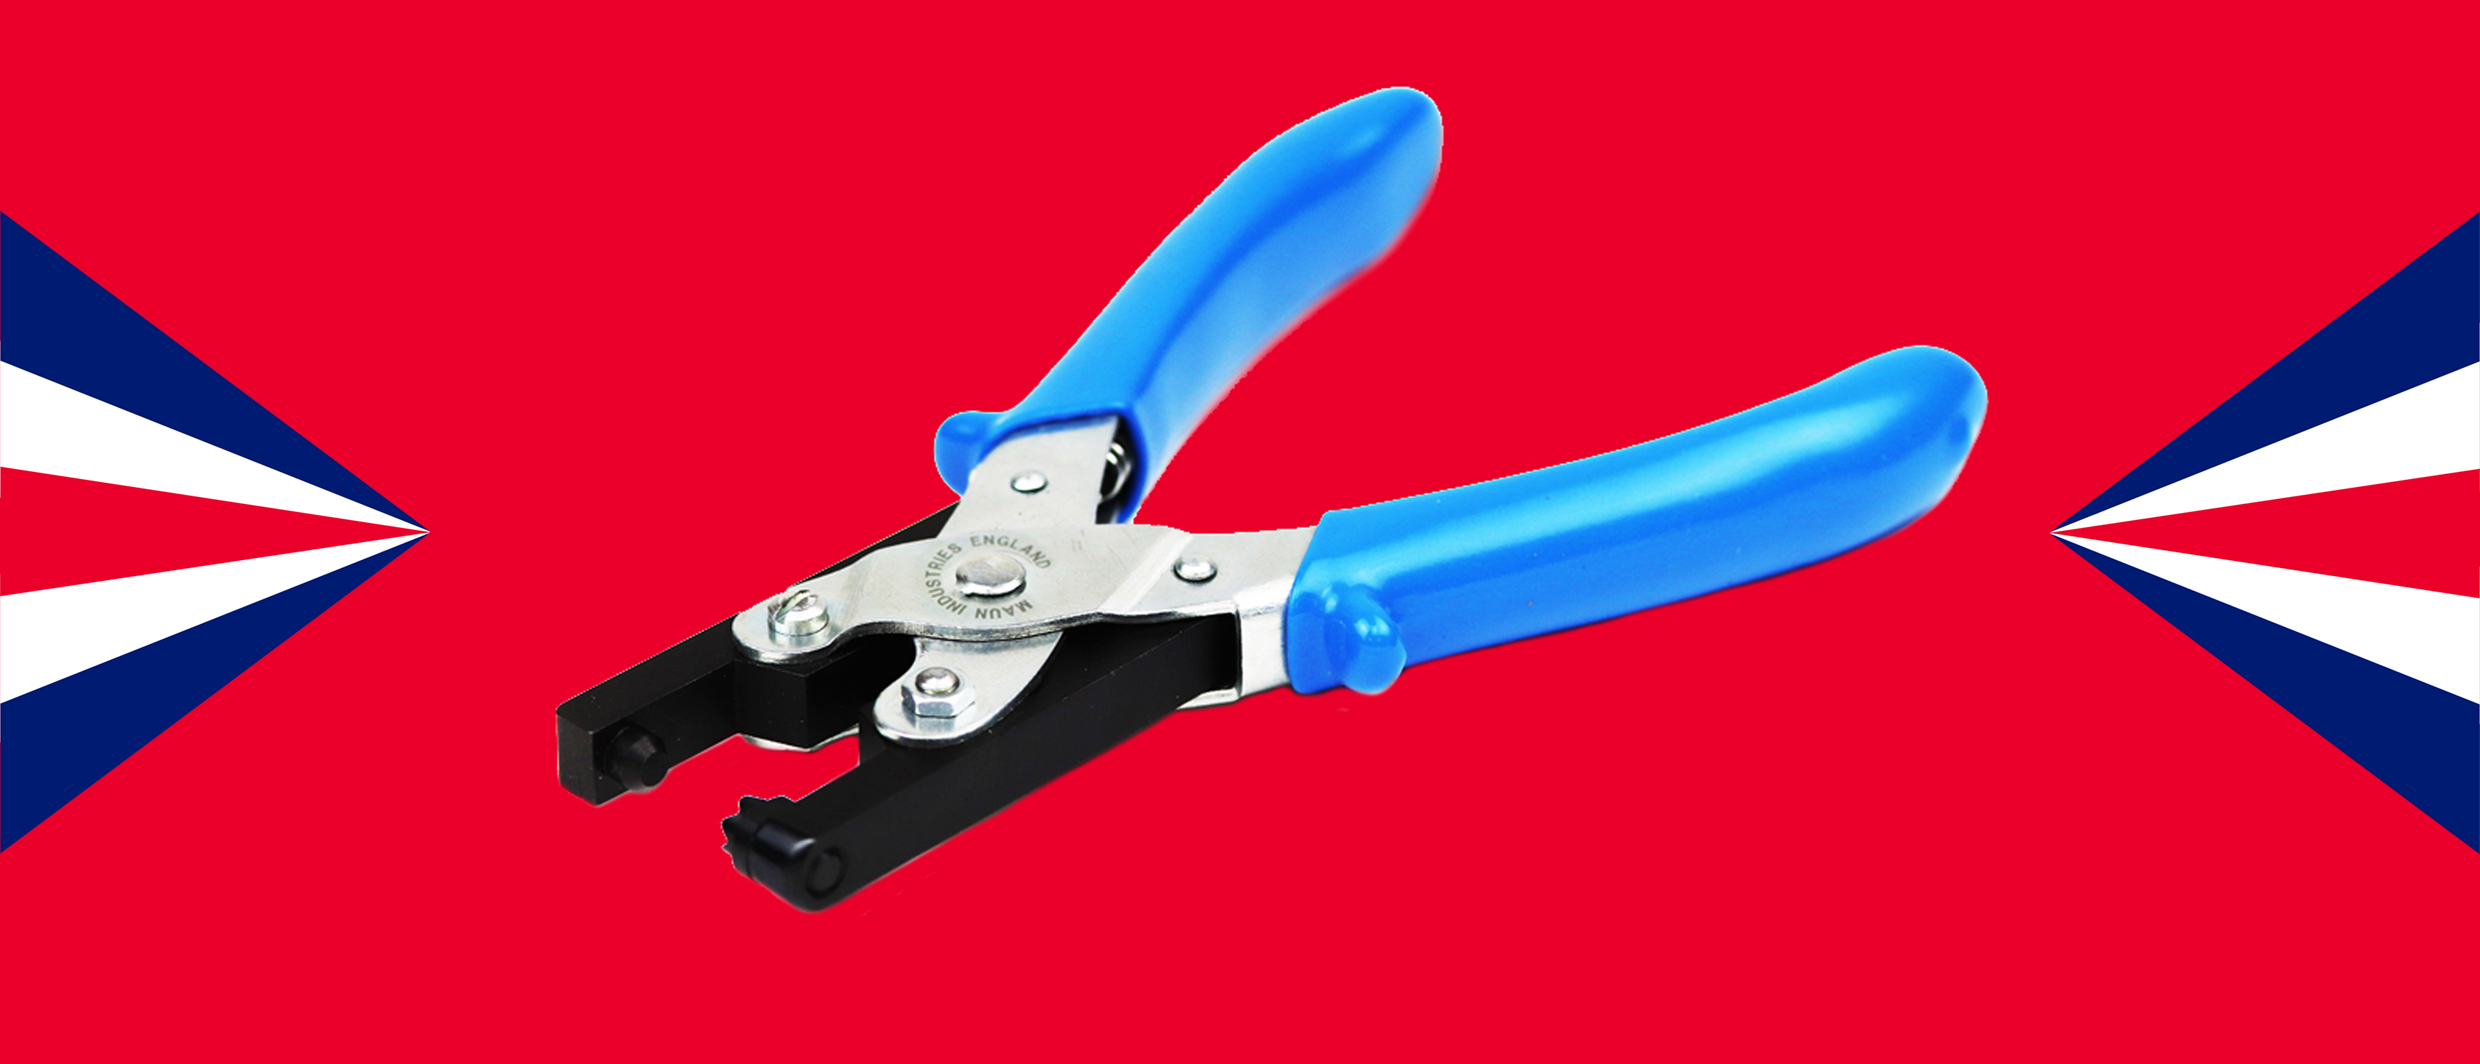 Shear Bolt Removal Tool For Gas Meters 160 mm